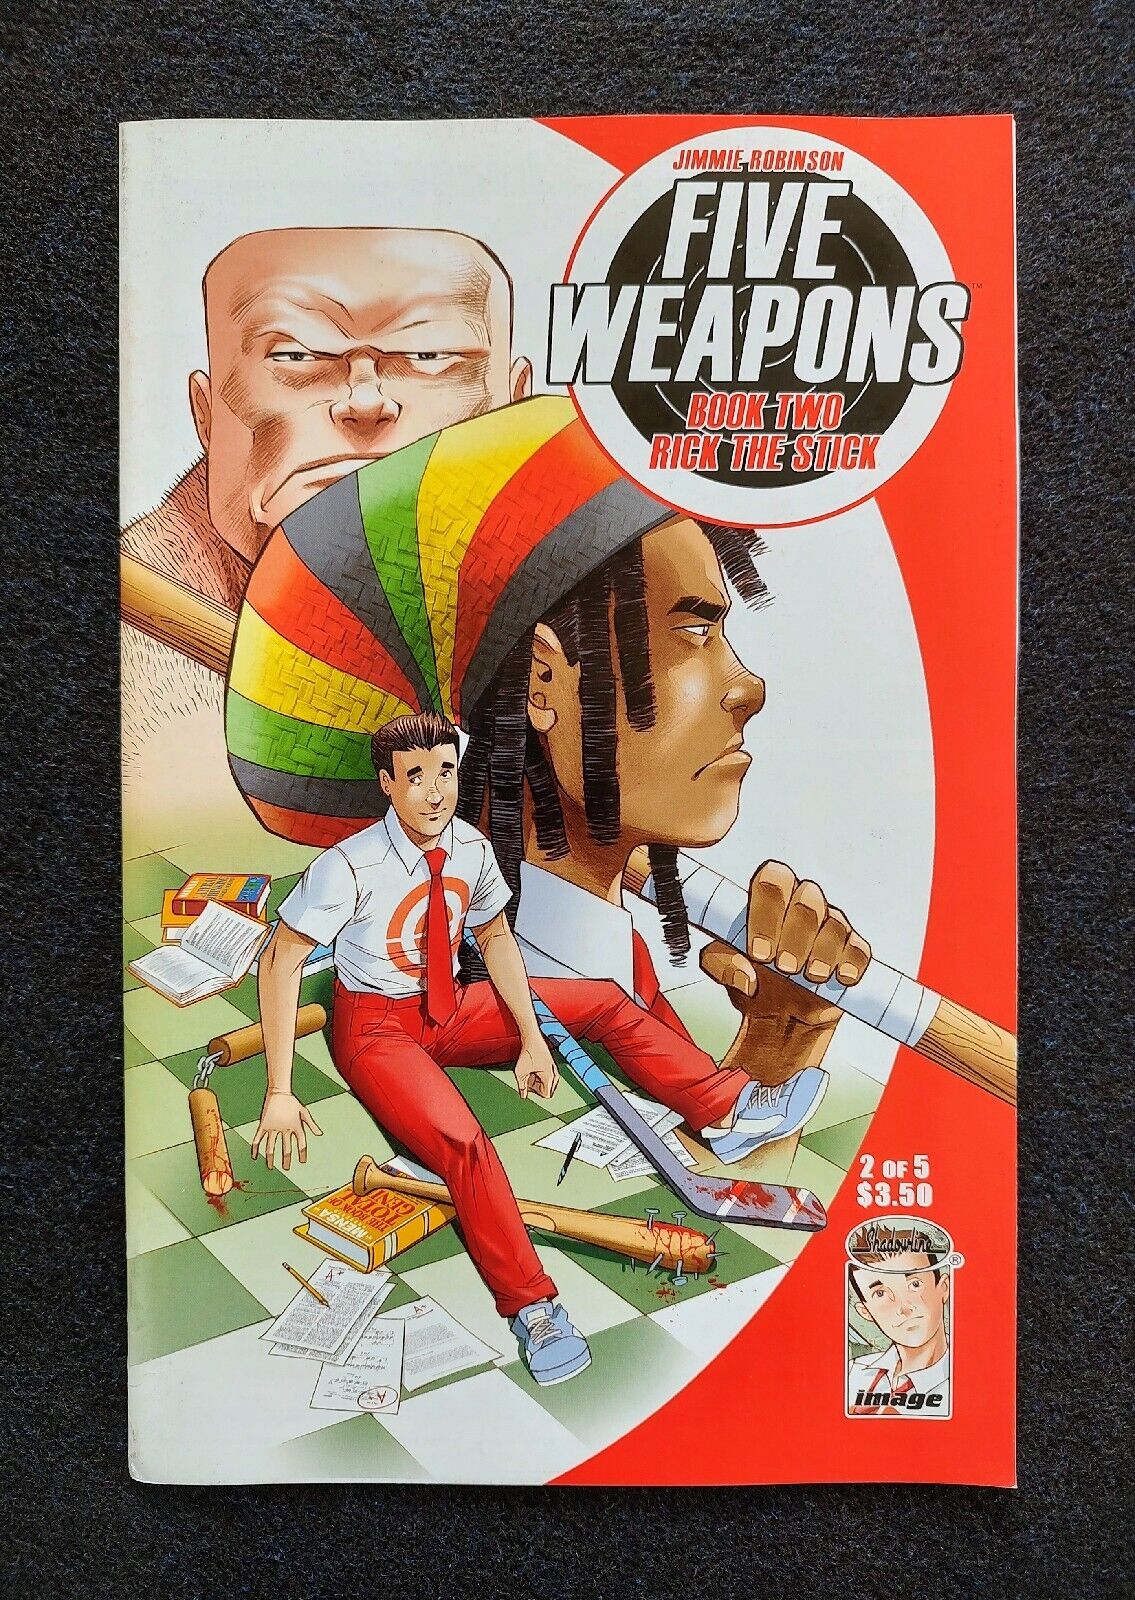 Five Weapons #2 Rick The Stick 2013 Image Comic Book Jimmie Robinson.